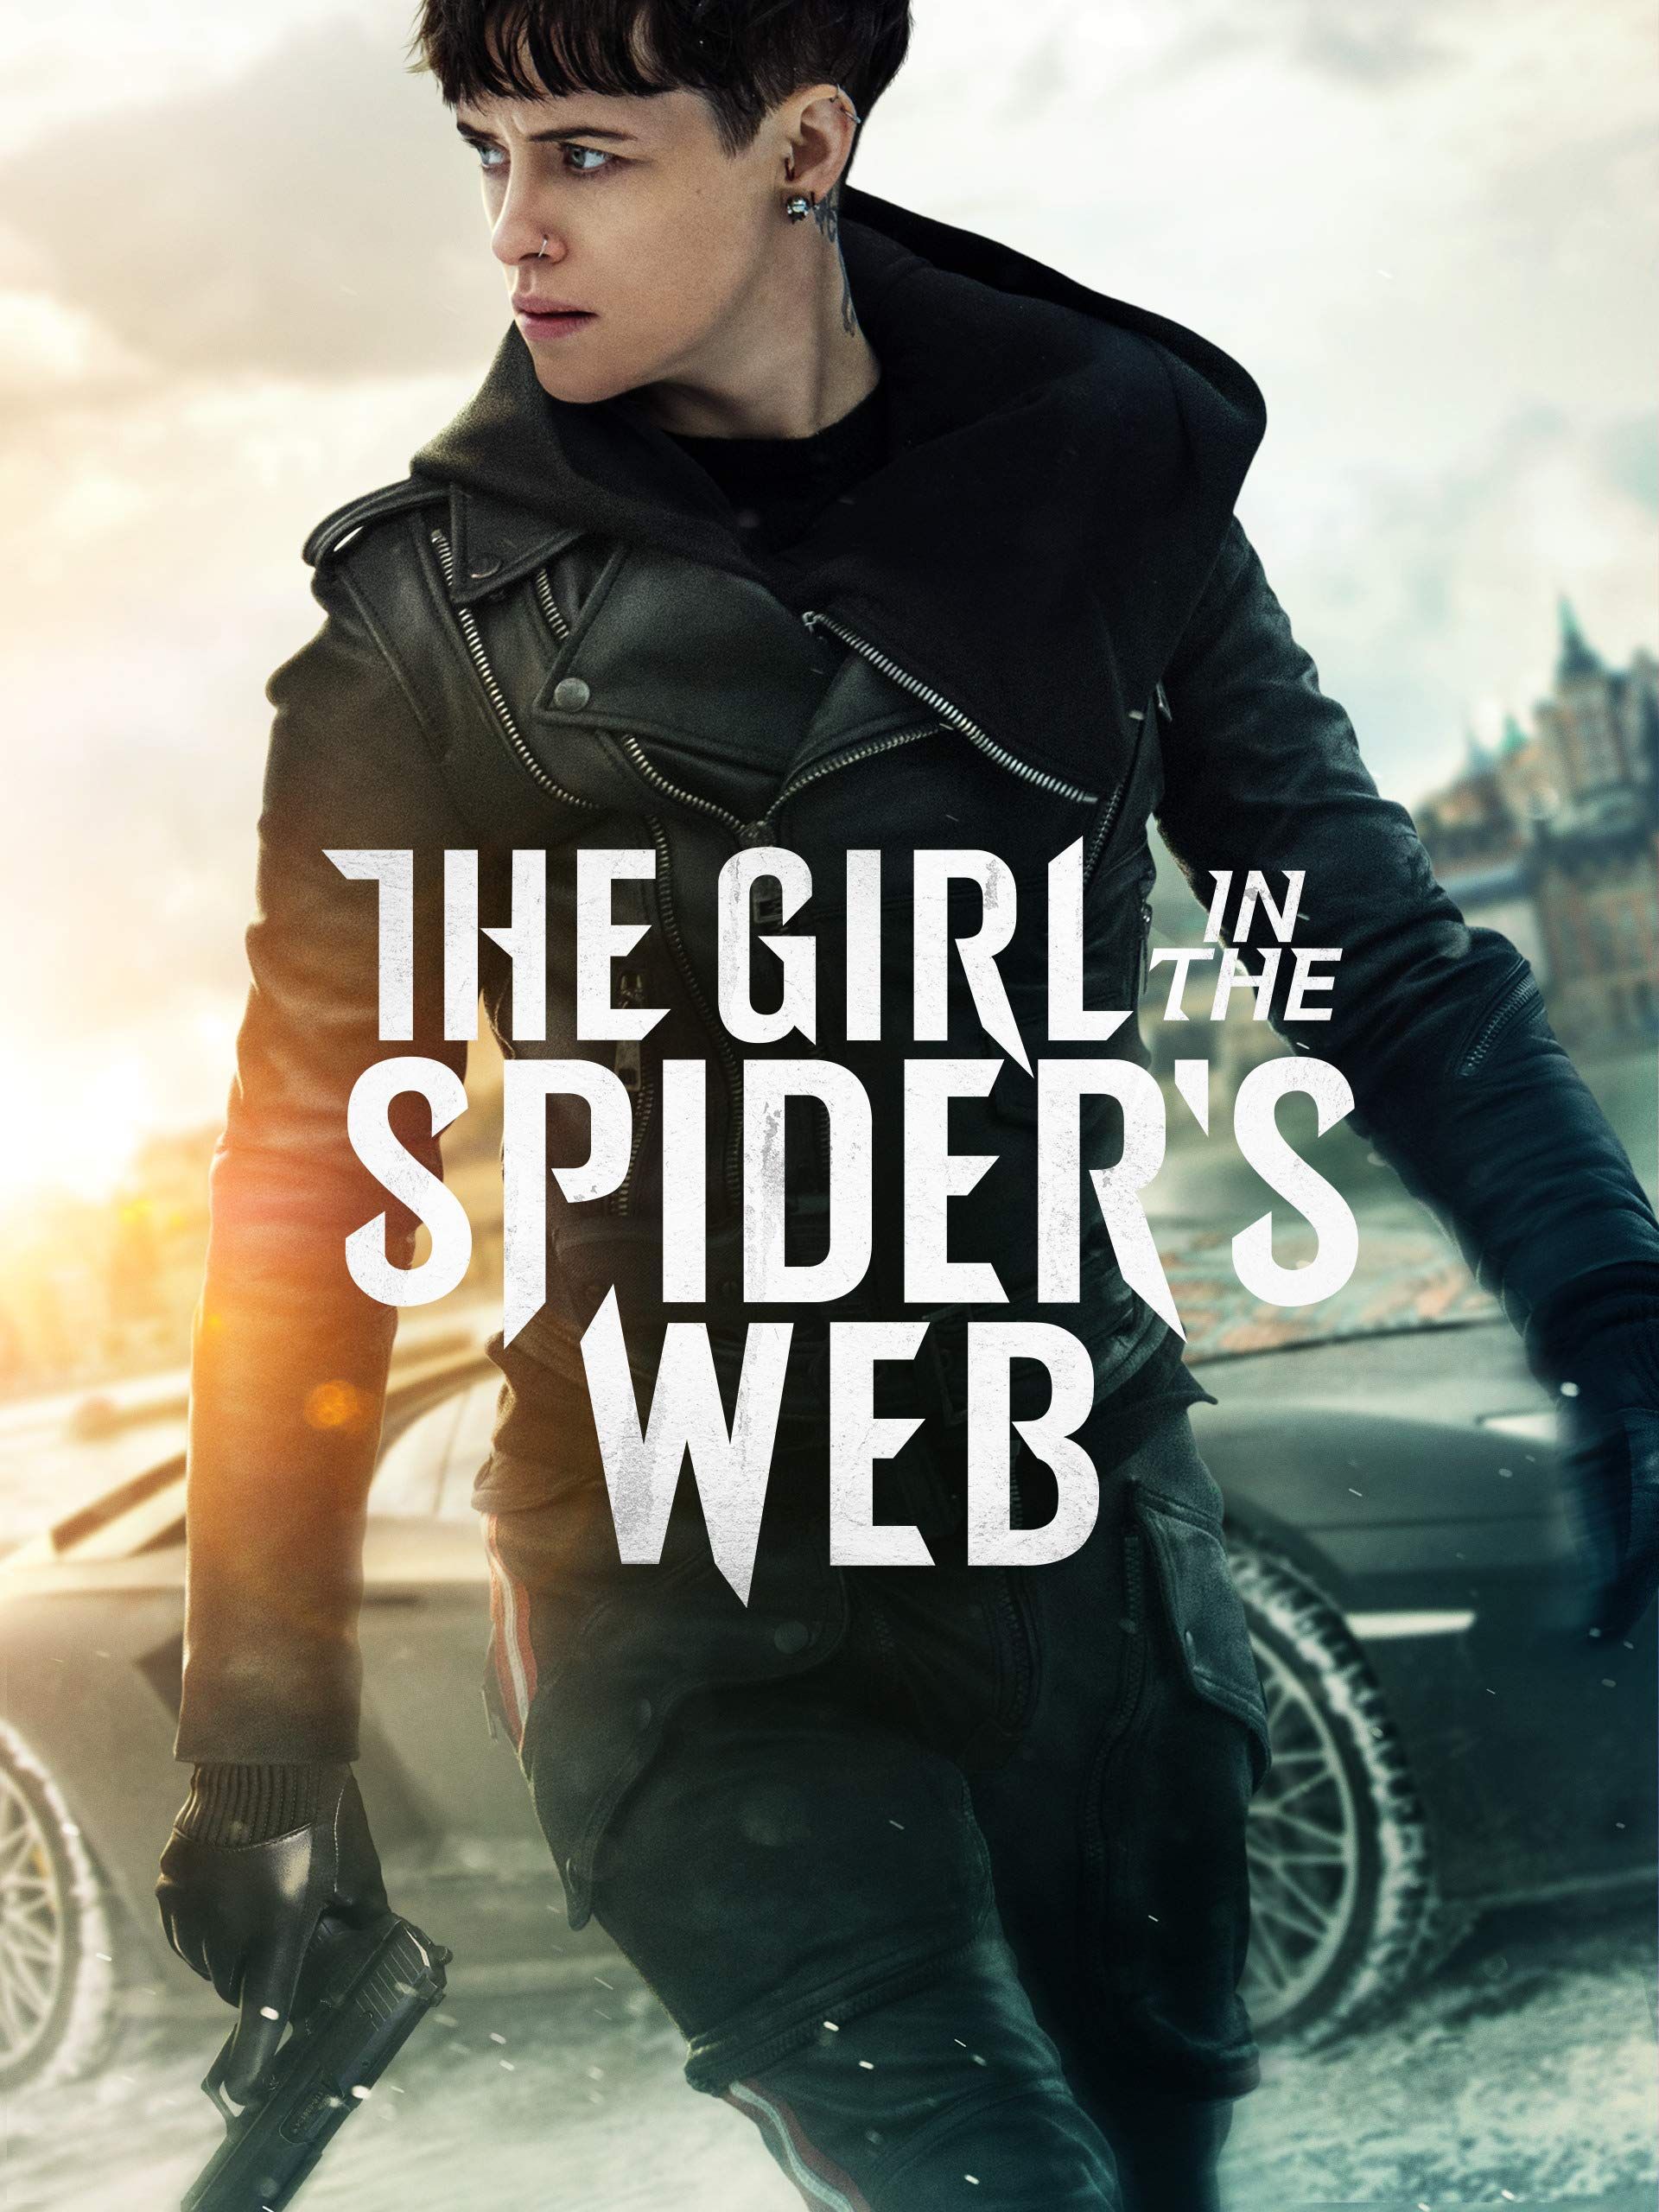 The Girl in the Spiders Web (2018) Hindi Dubbed Movie